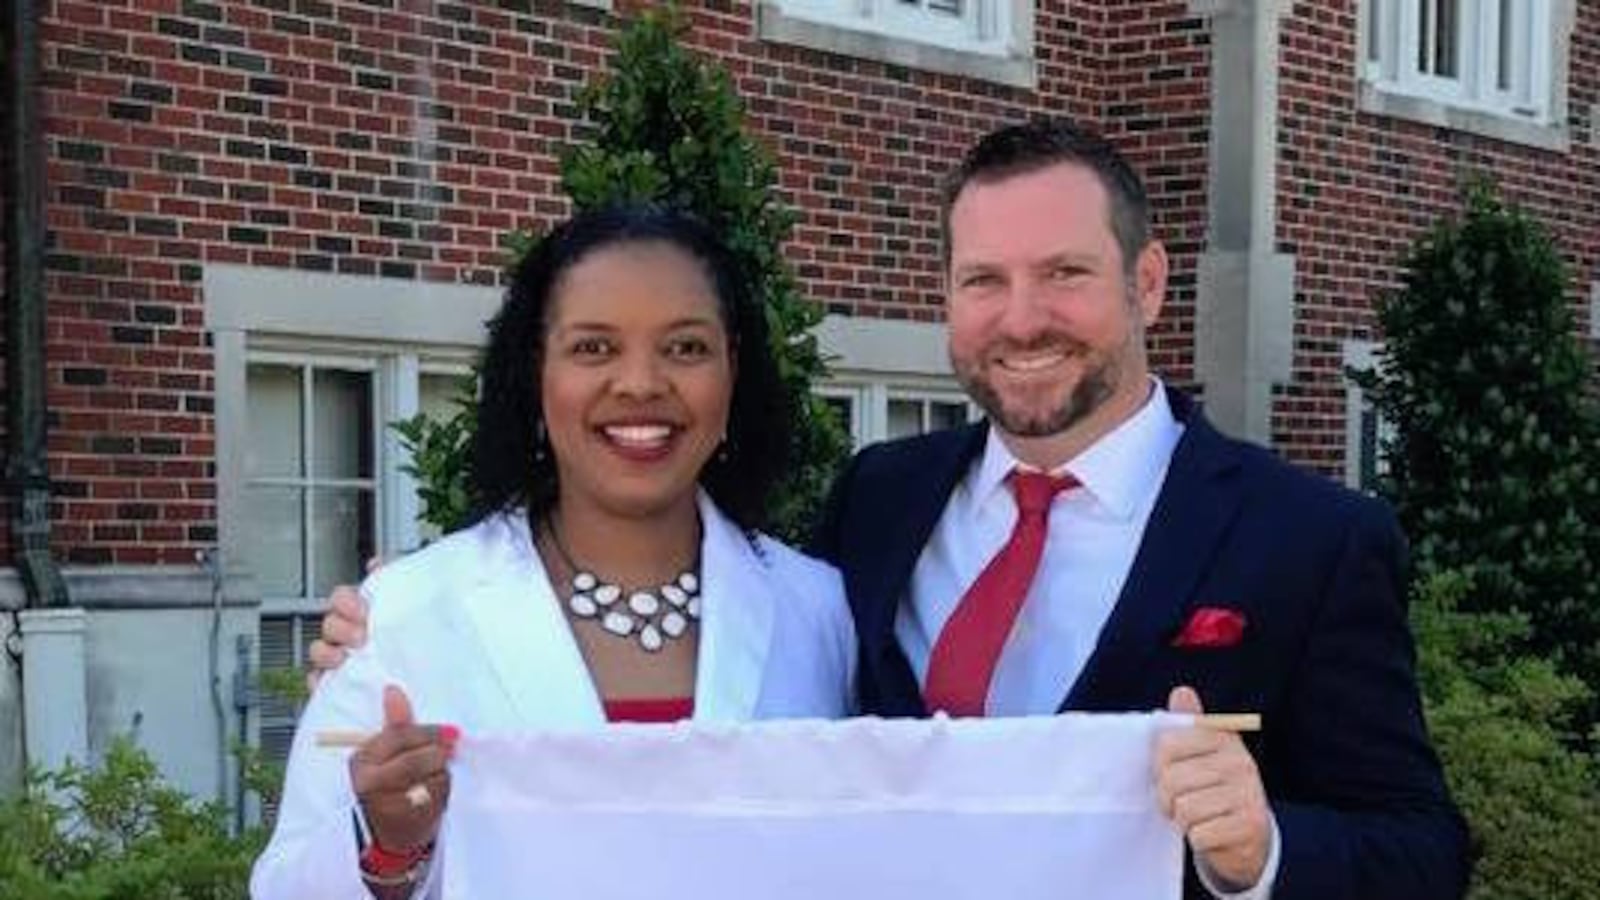 Andy Demster is taking the reins from founding principal Lischa Brooks at Maxine Smith STEAM Academy, an optional school in Midtown Memphis.